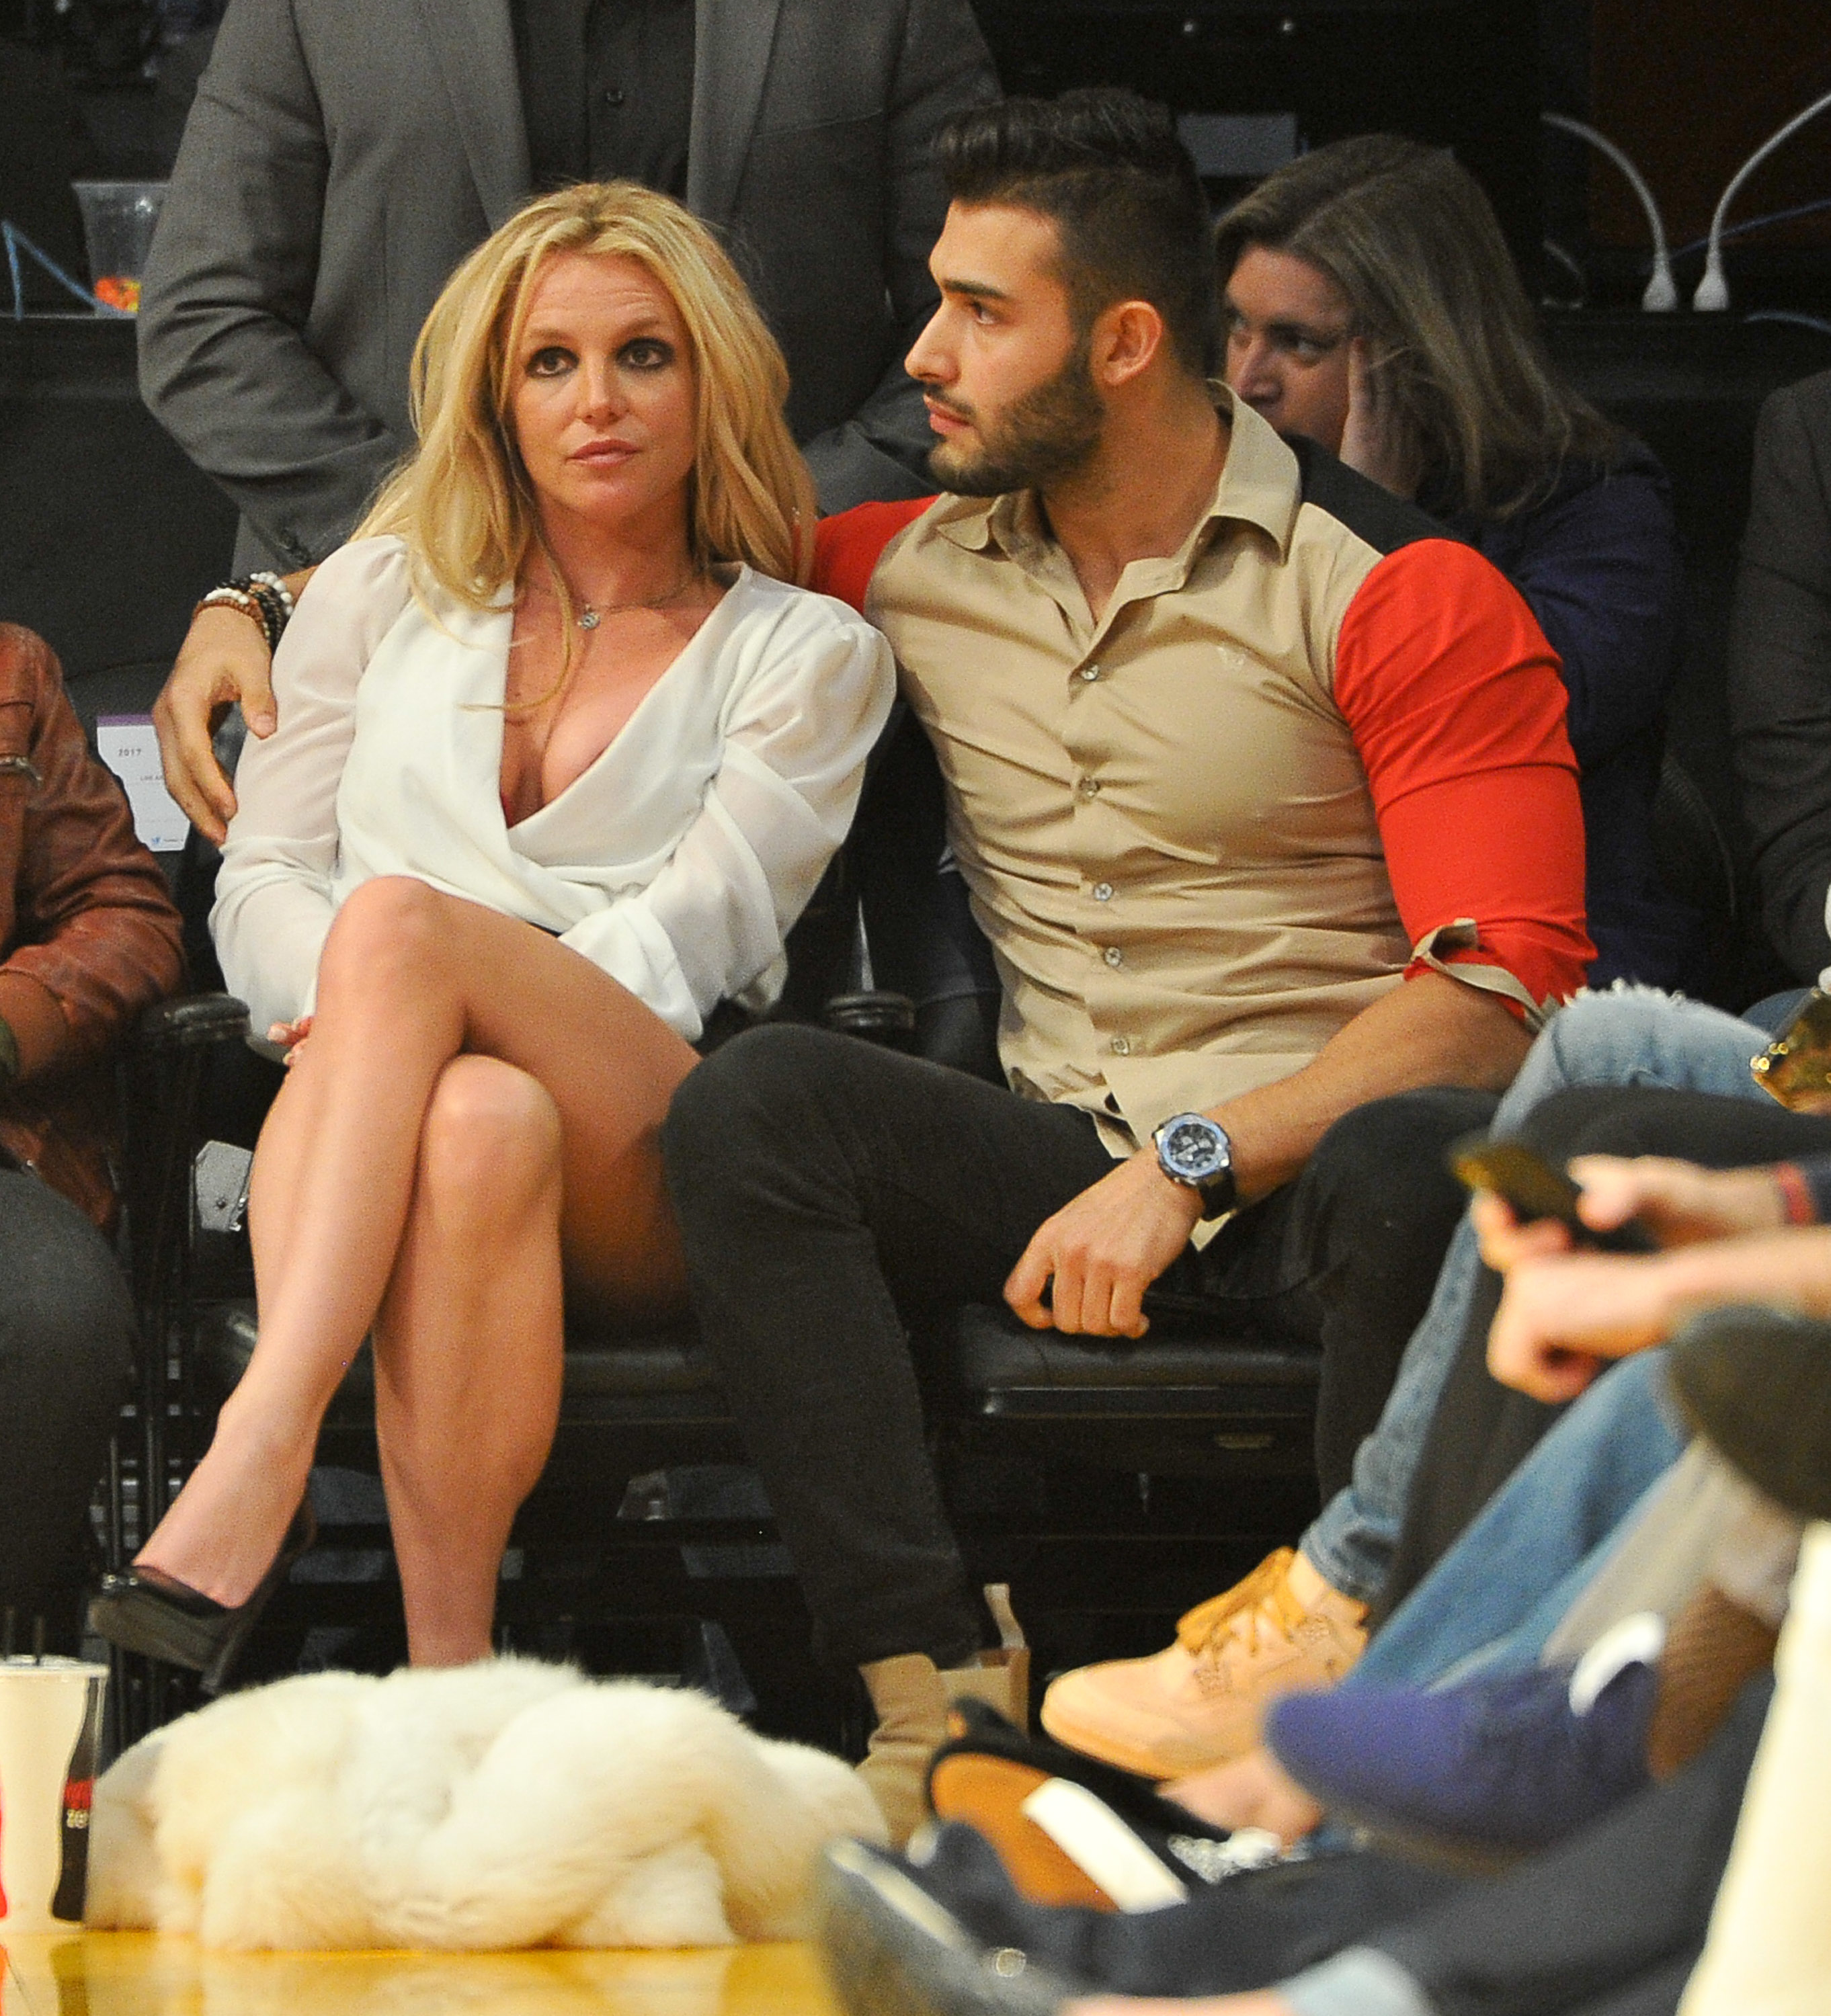 Britney Spears and Sam Asghari sitting court side at a basketball game. Sam has his arm around Britney&#x27;s shoulders